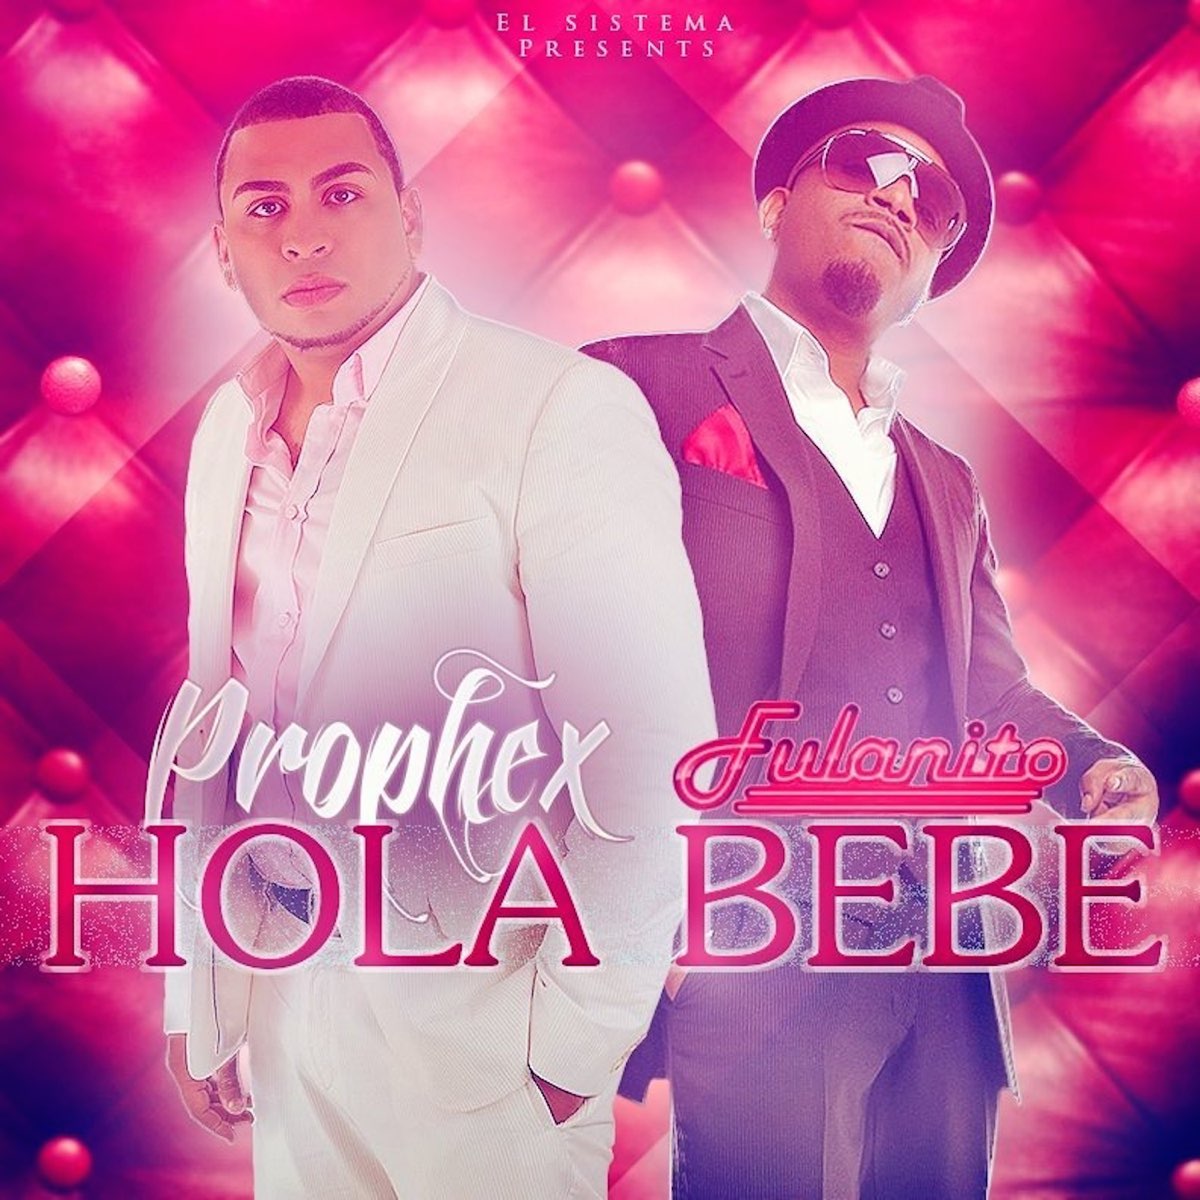 Hola Bebe (feat. Fulanito) - Single by Prophex on Apple Music